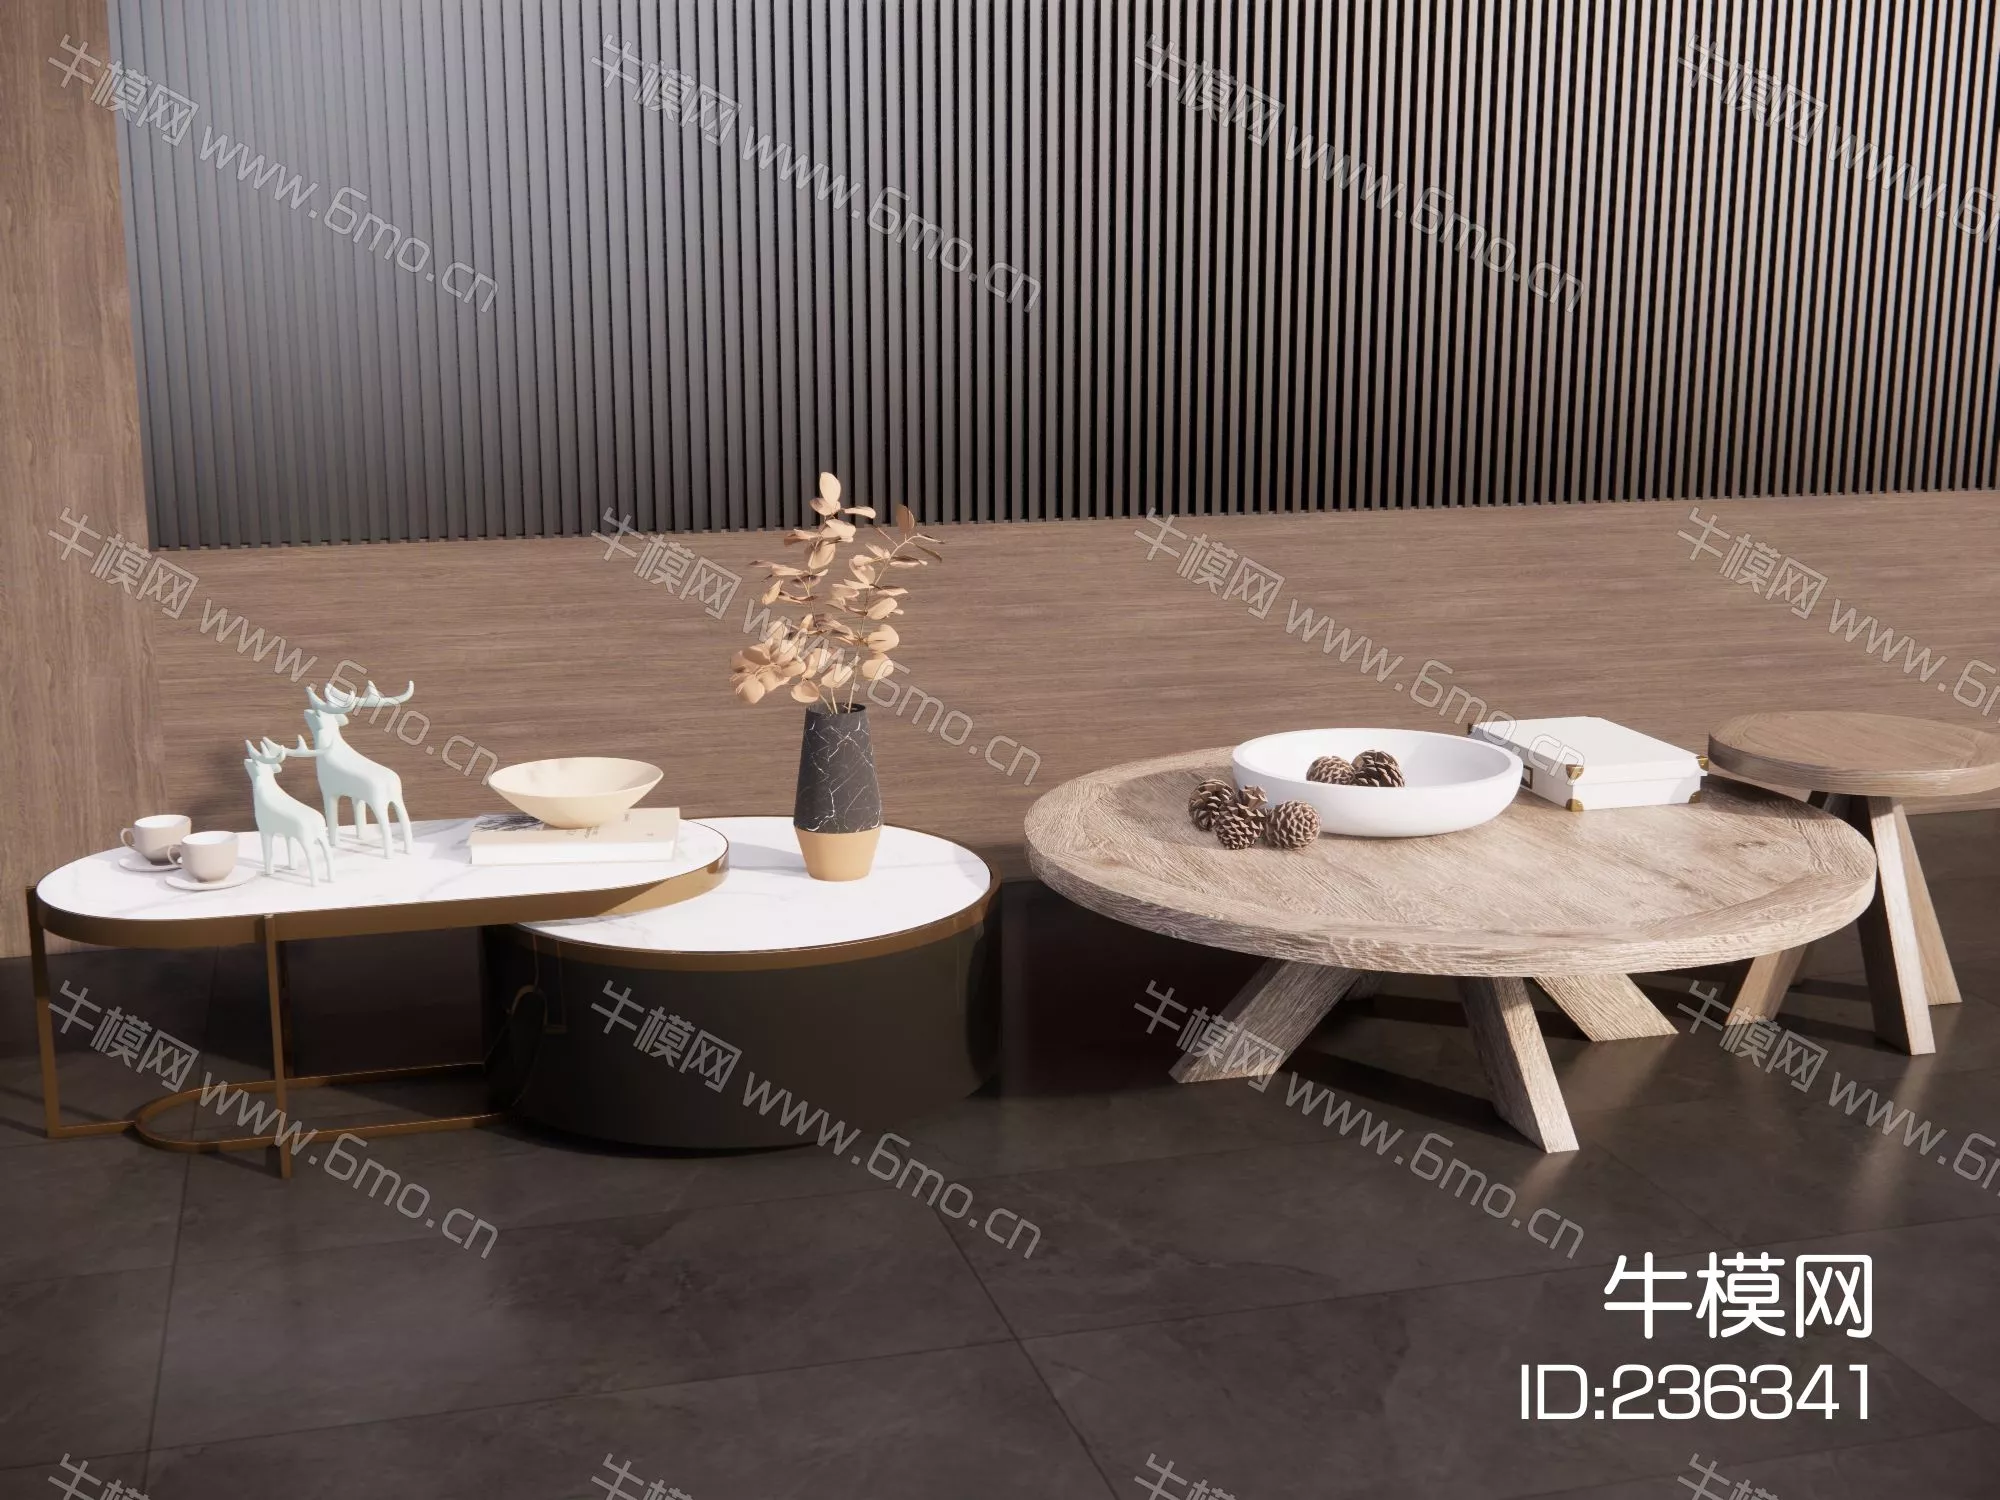 MODERN COFFEE TABLE - SKETCHUP 3D MODEL - ENSCAPE - 236341